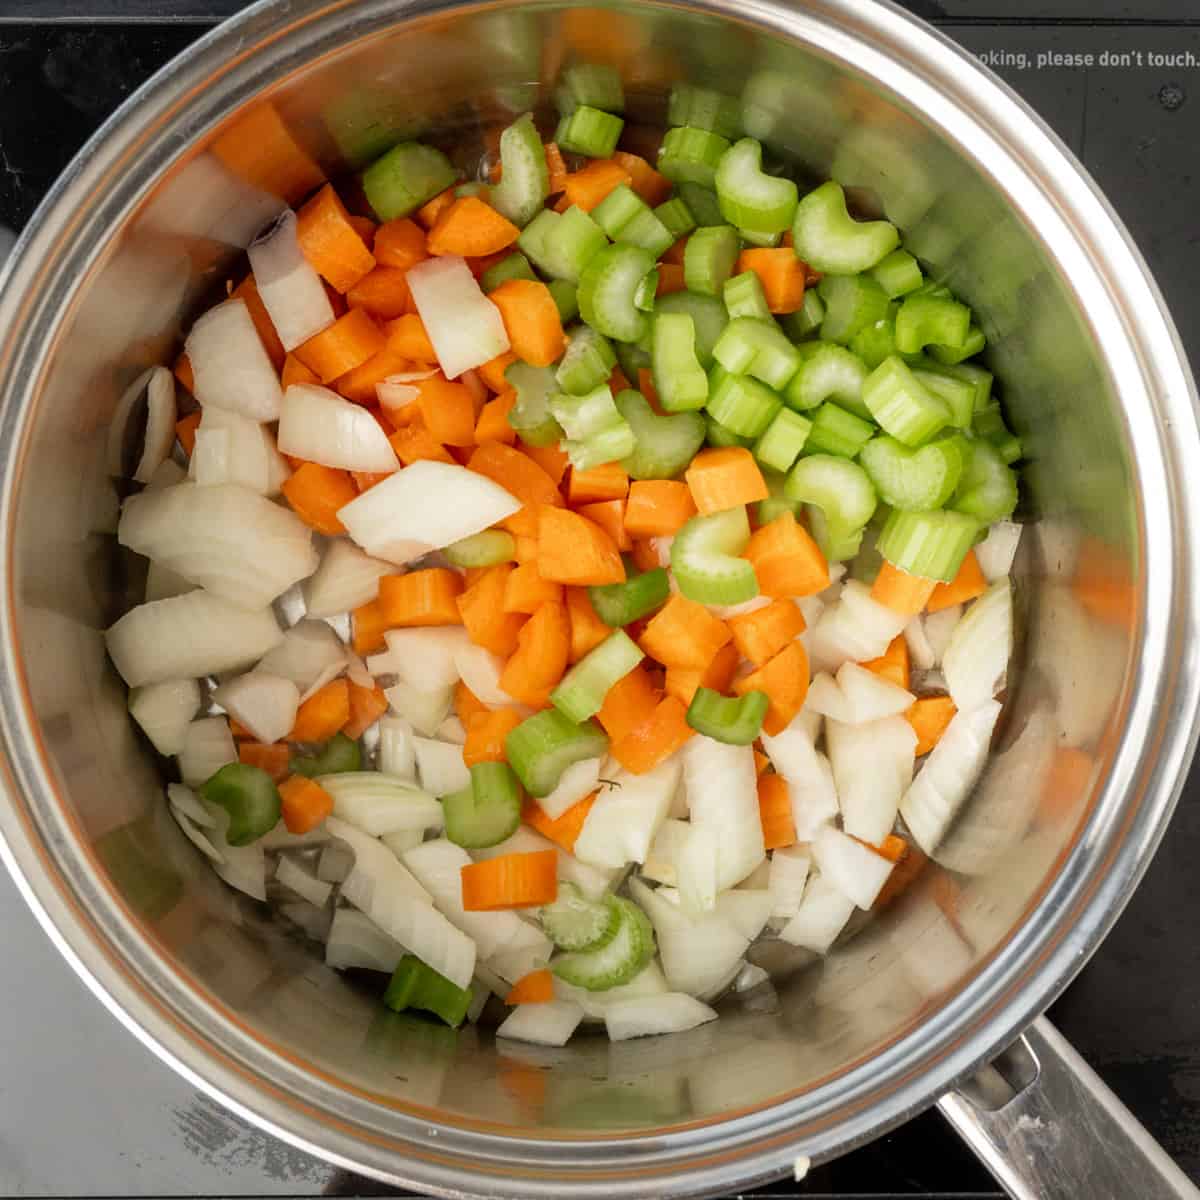 diced onion, carrot and celery in a saucepan.